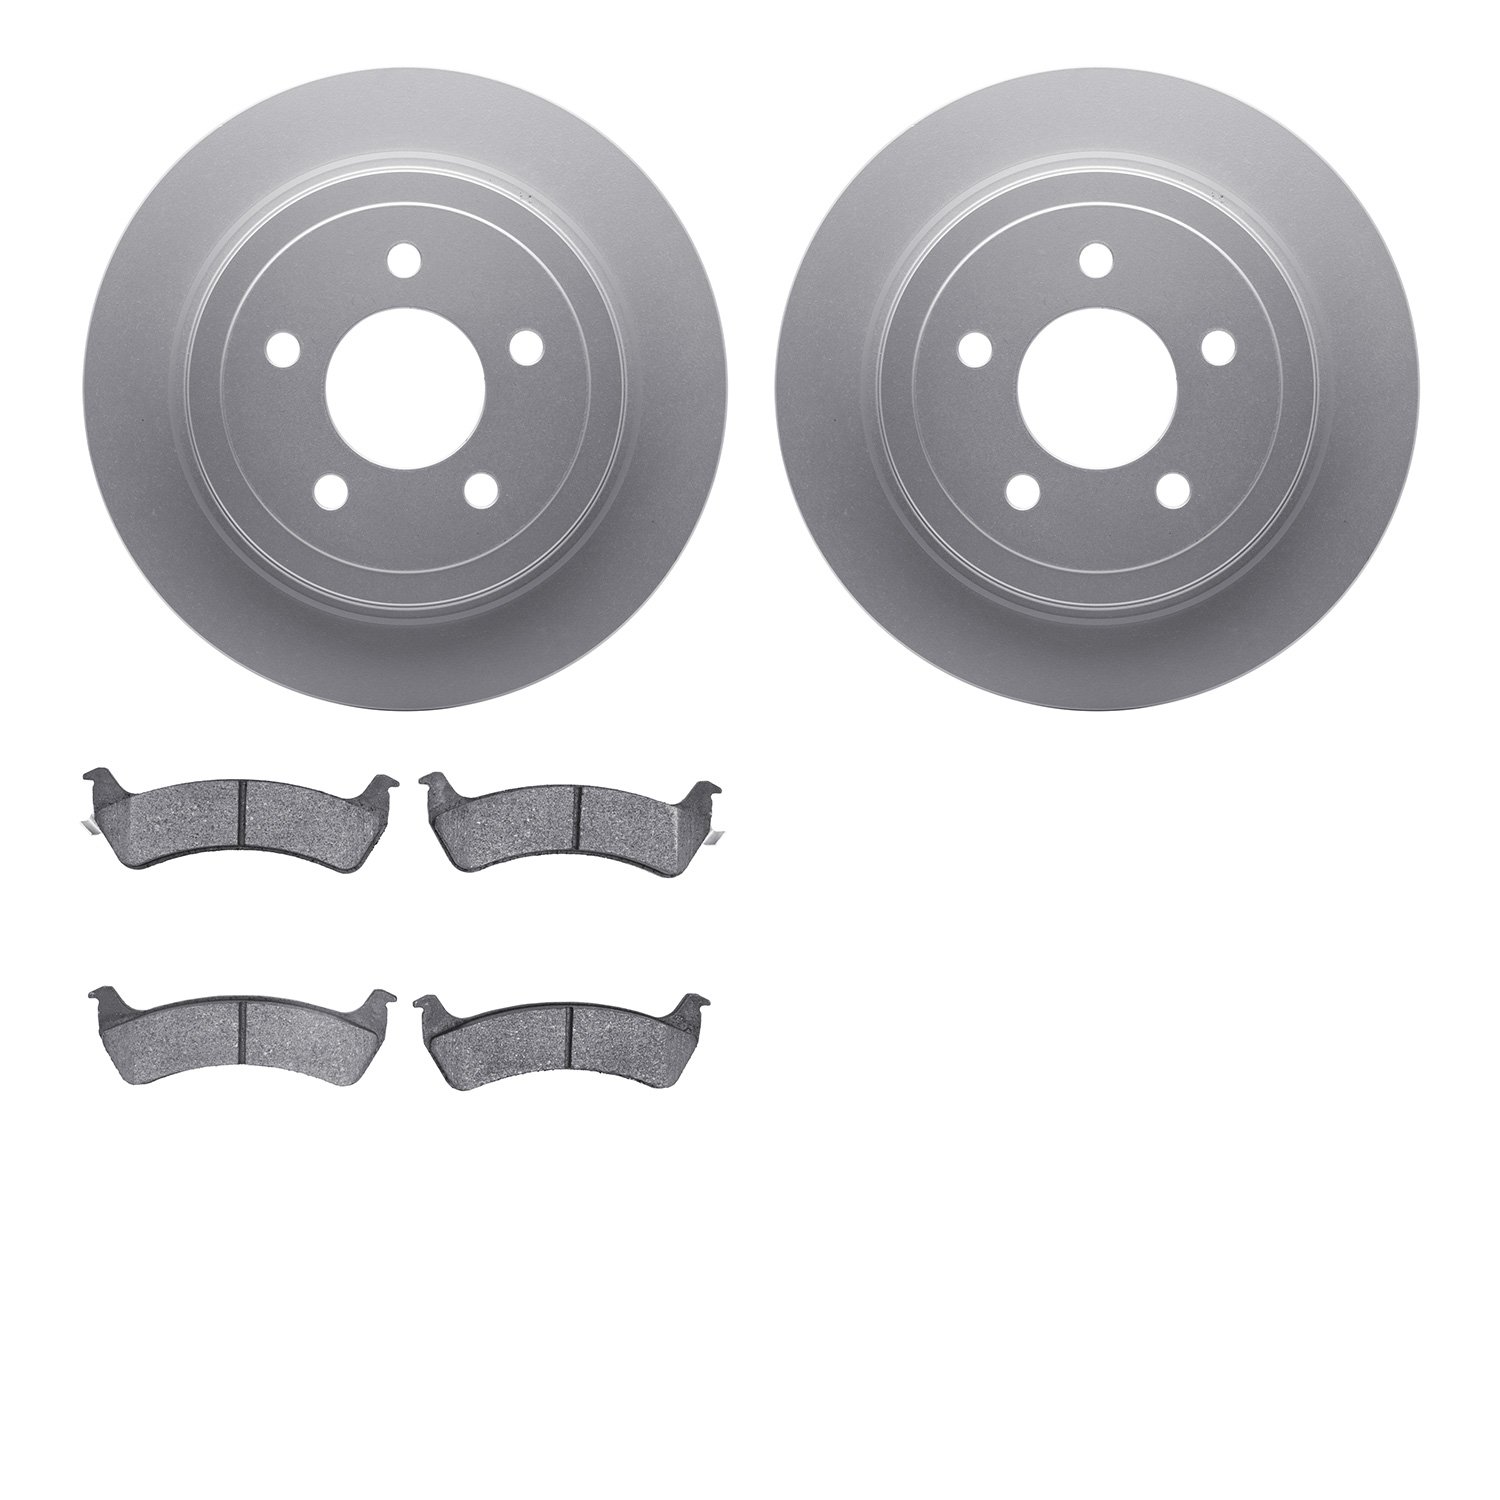 4402-54044 Geospec Brake Rotors with Ultimate-Duty Brake Pads Kit, 2003-2005 Ford/Lincoln/Mercury/Mazda, Position: Rear